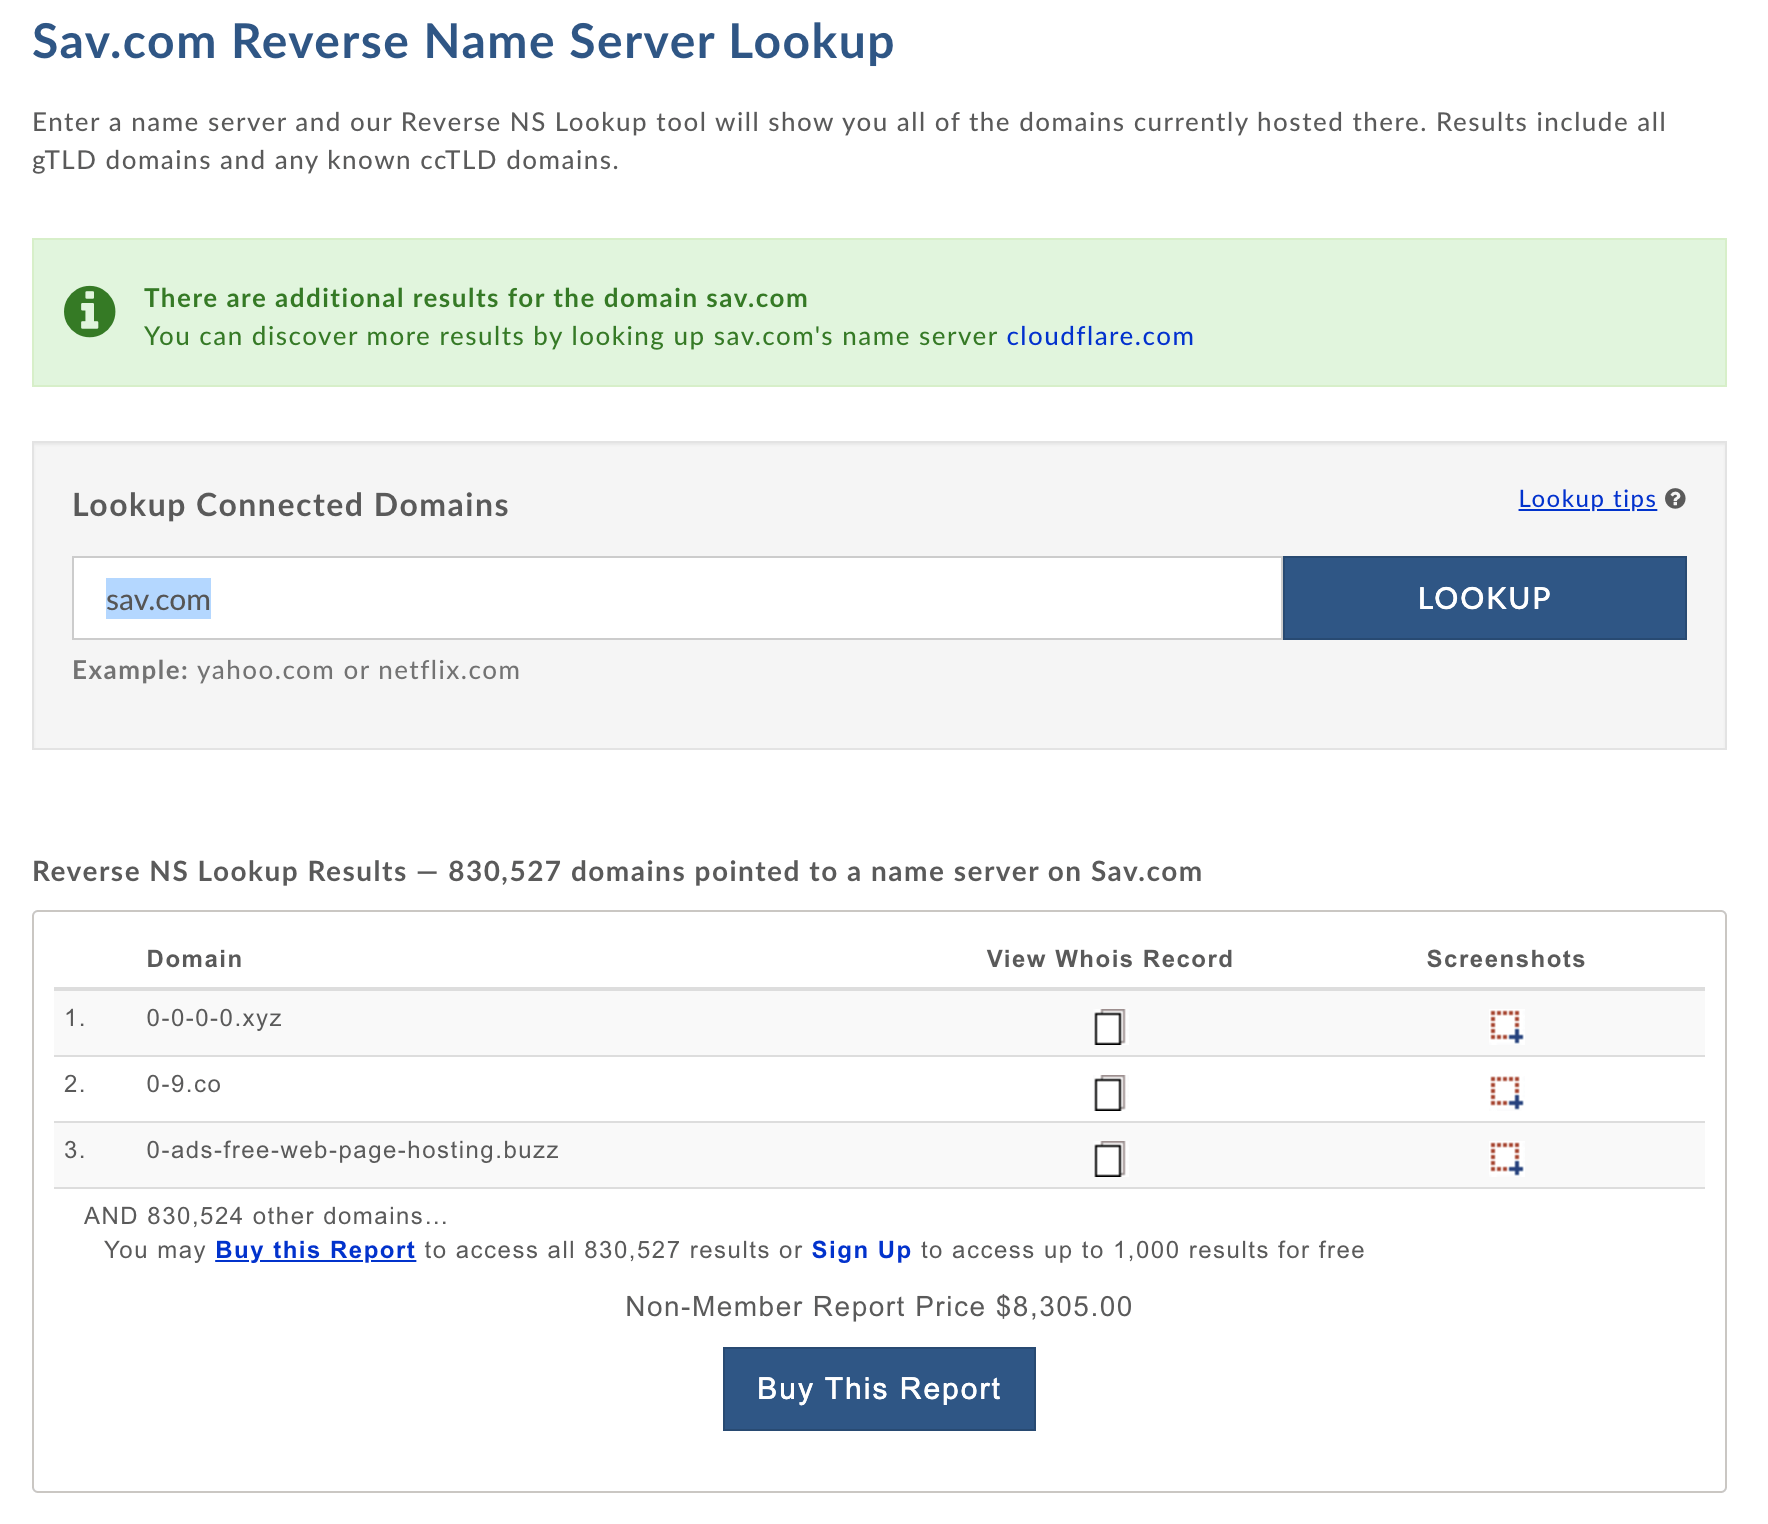 A results screen showing that there are 830,527 domains pointed to sav.com nameservers